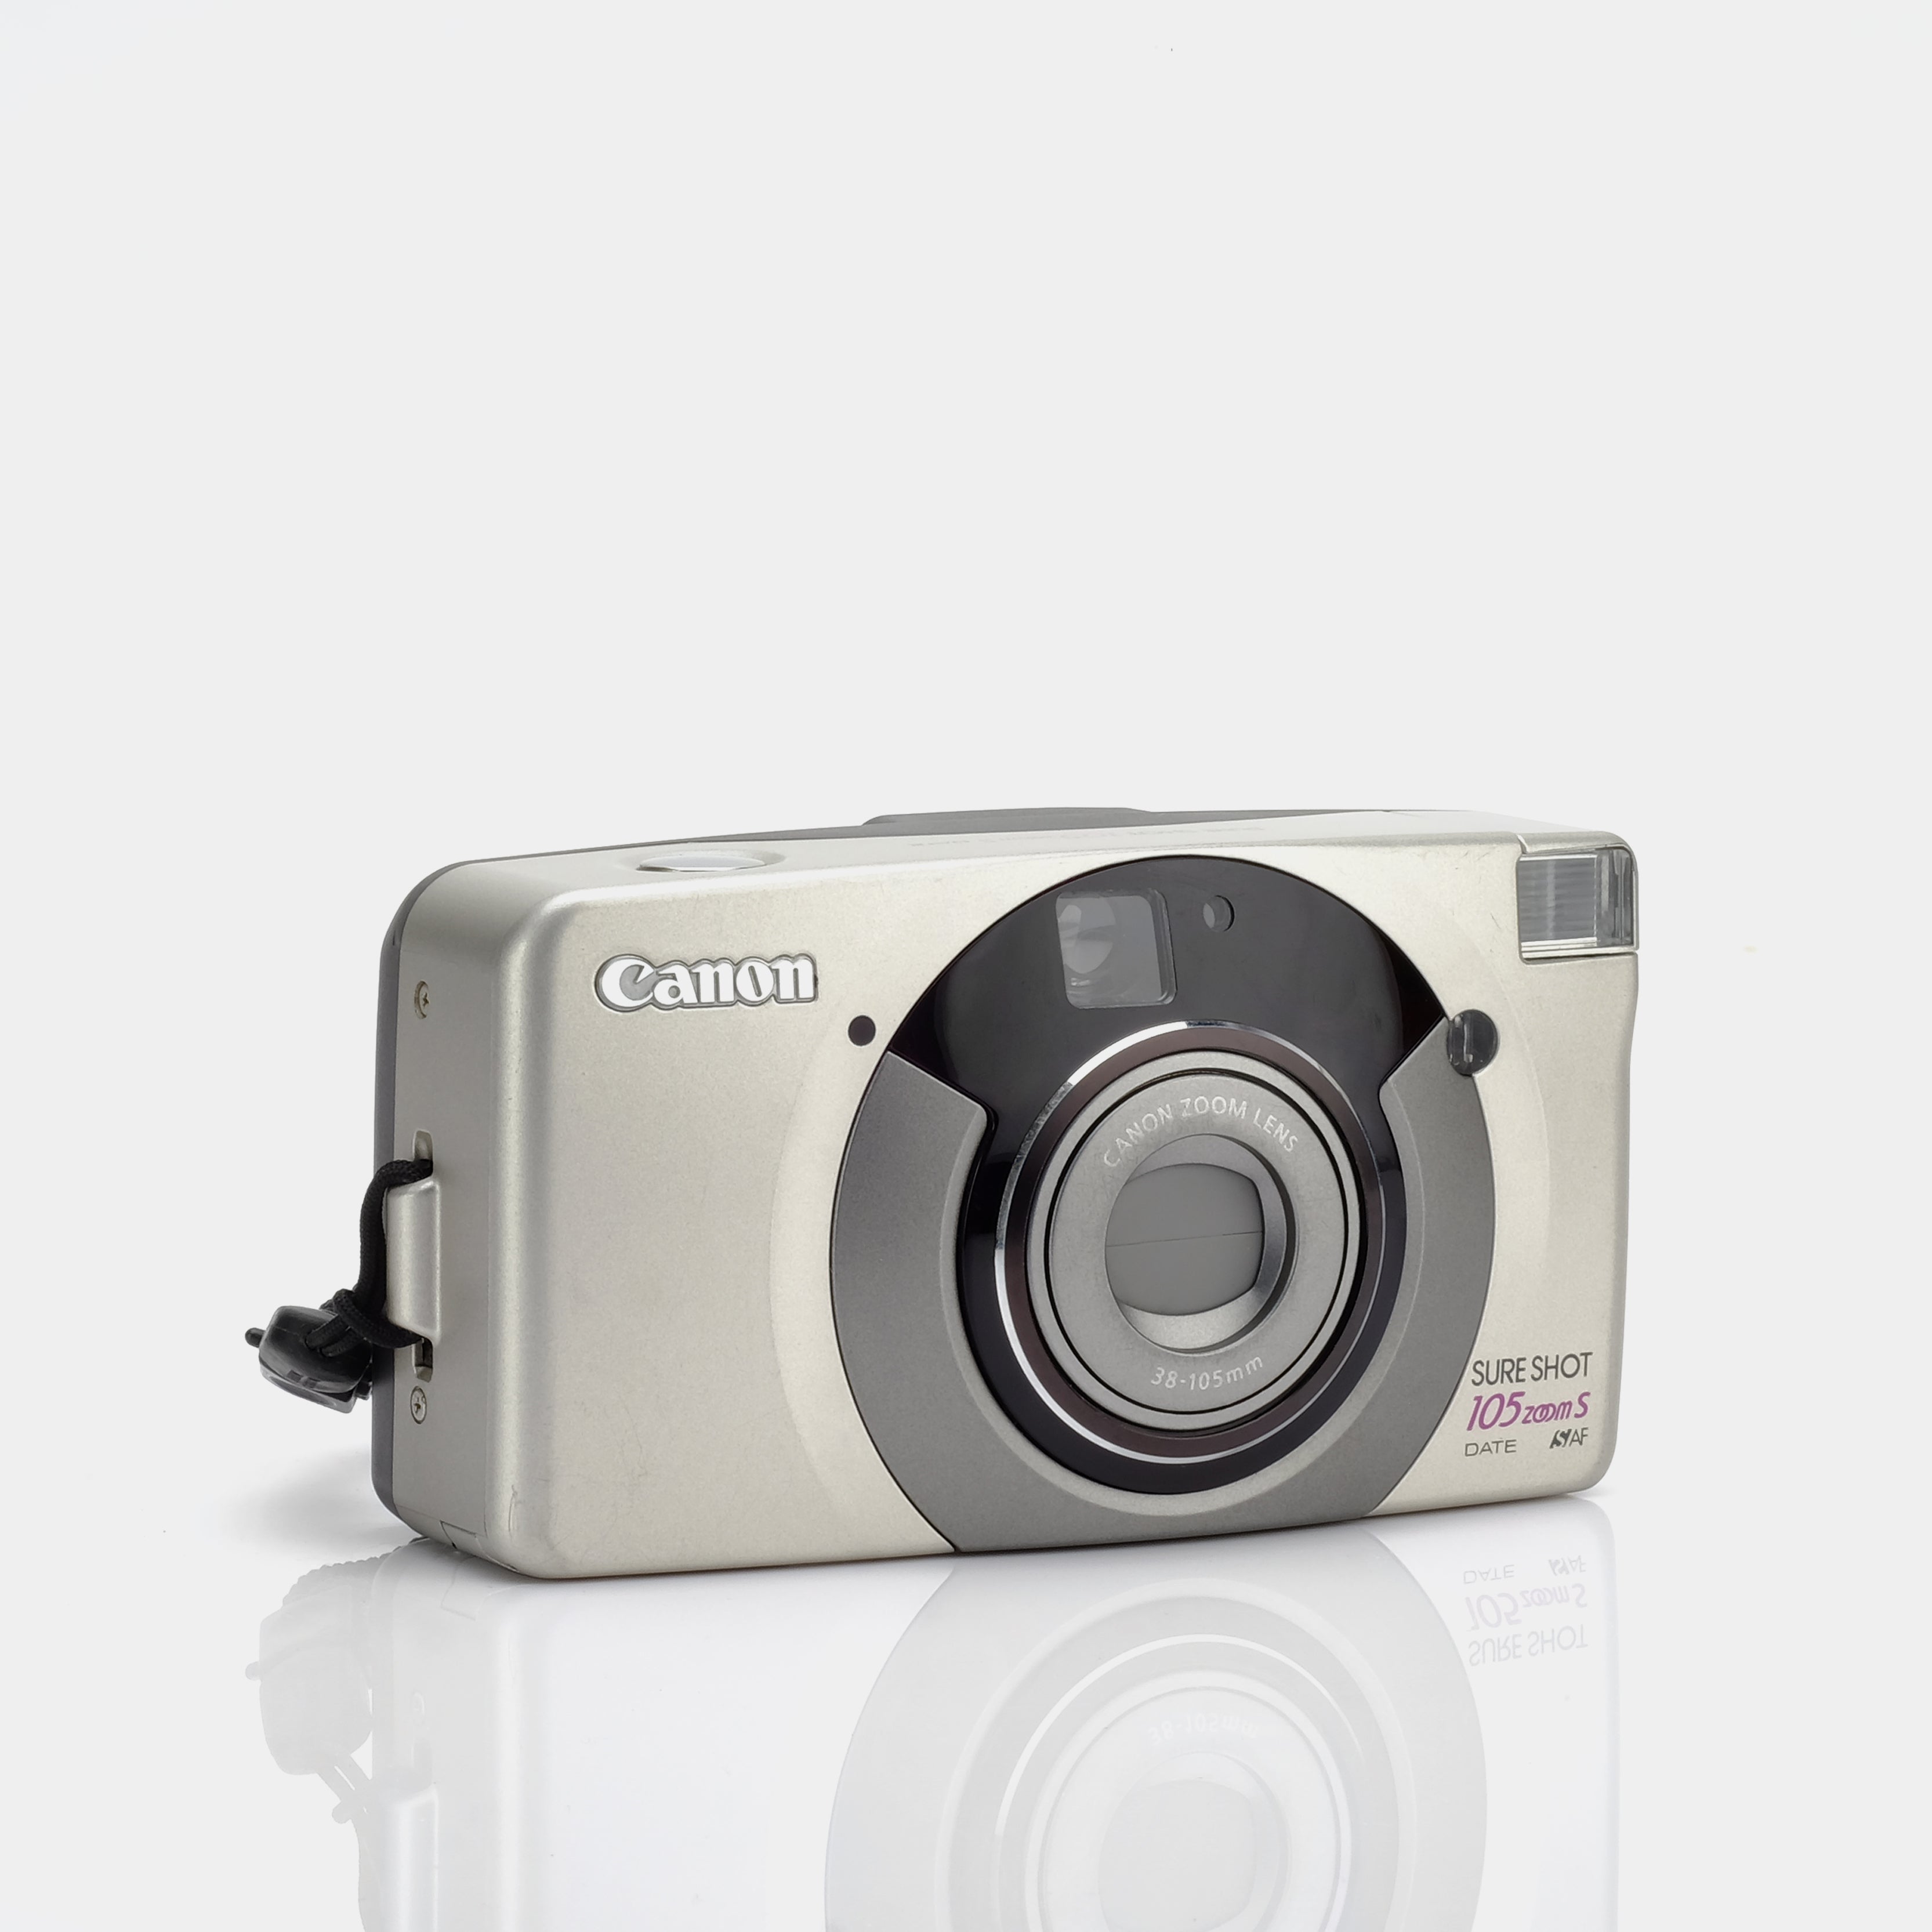 Canon Sure Shot 105 Zoom S 35mm Point and Shoot Film Camera